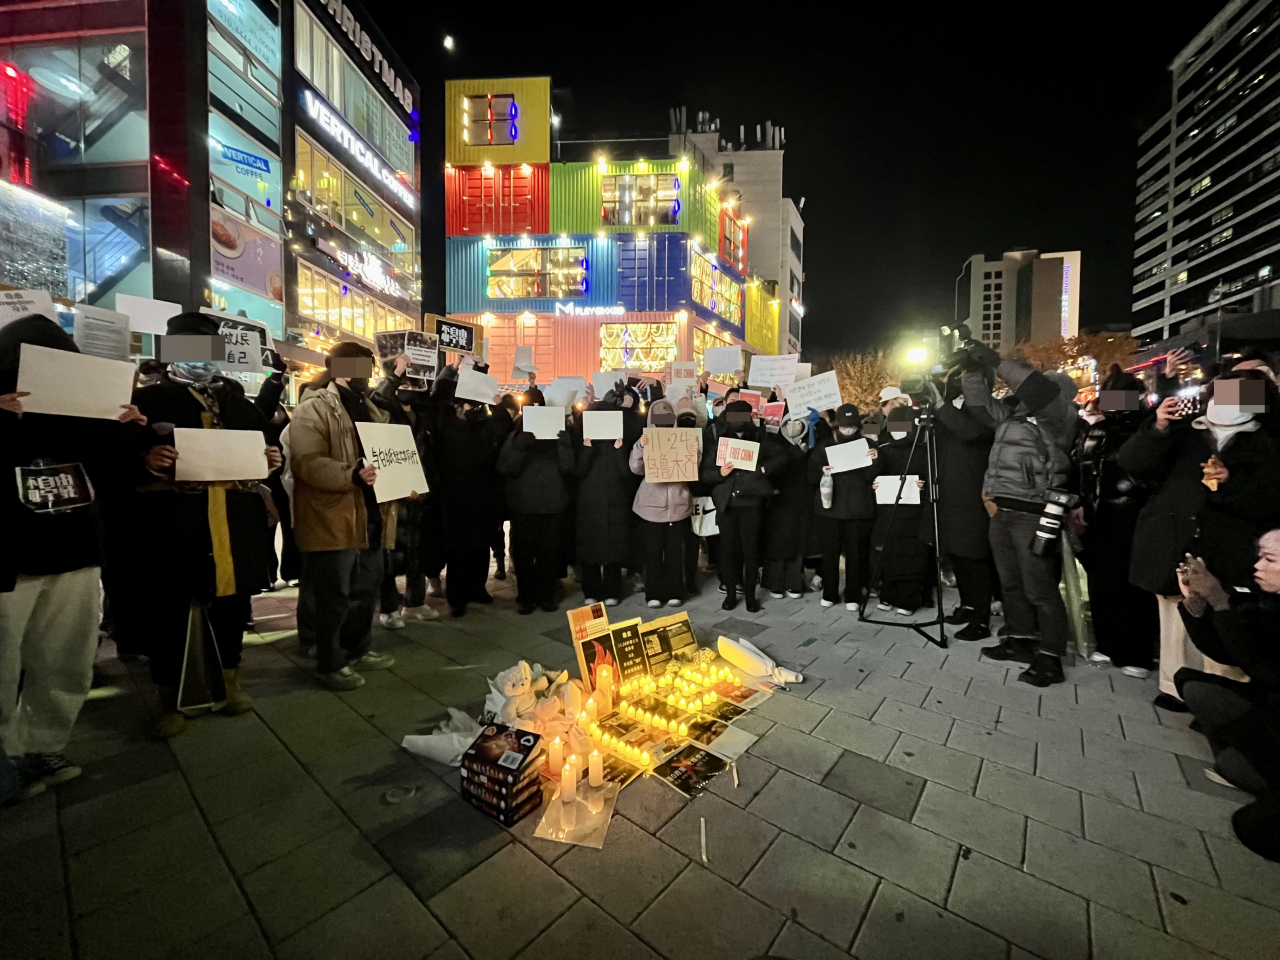 Protesters gather around an altar set up for remembering the victims of a recent deadly fire in Urumqi, the capital of Xinjiang Uyghur Autonomous Region in China, Wednesday. (Kim Arin/The Korea Herald)